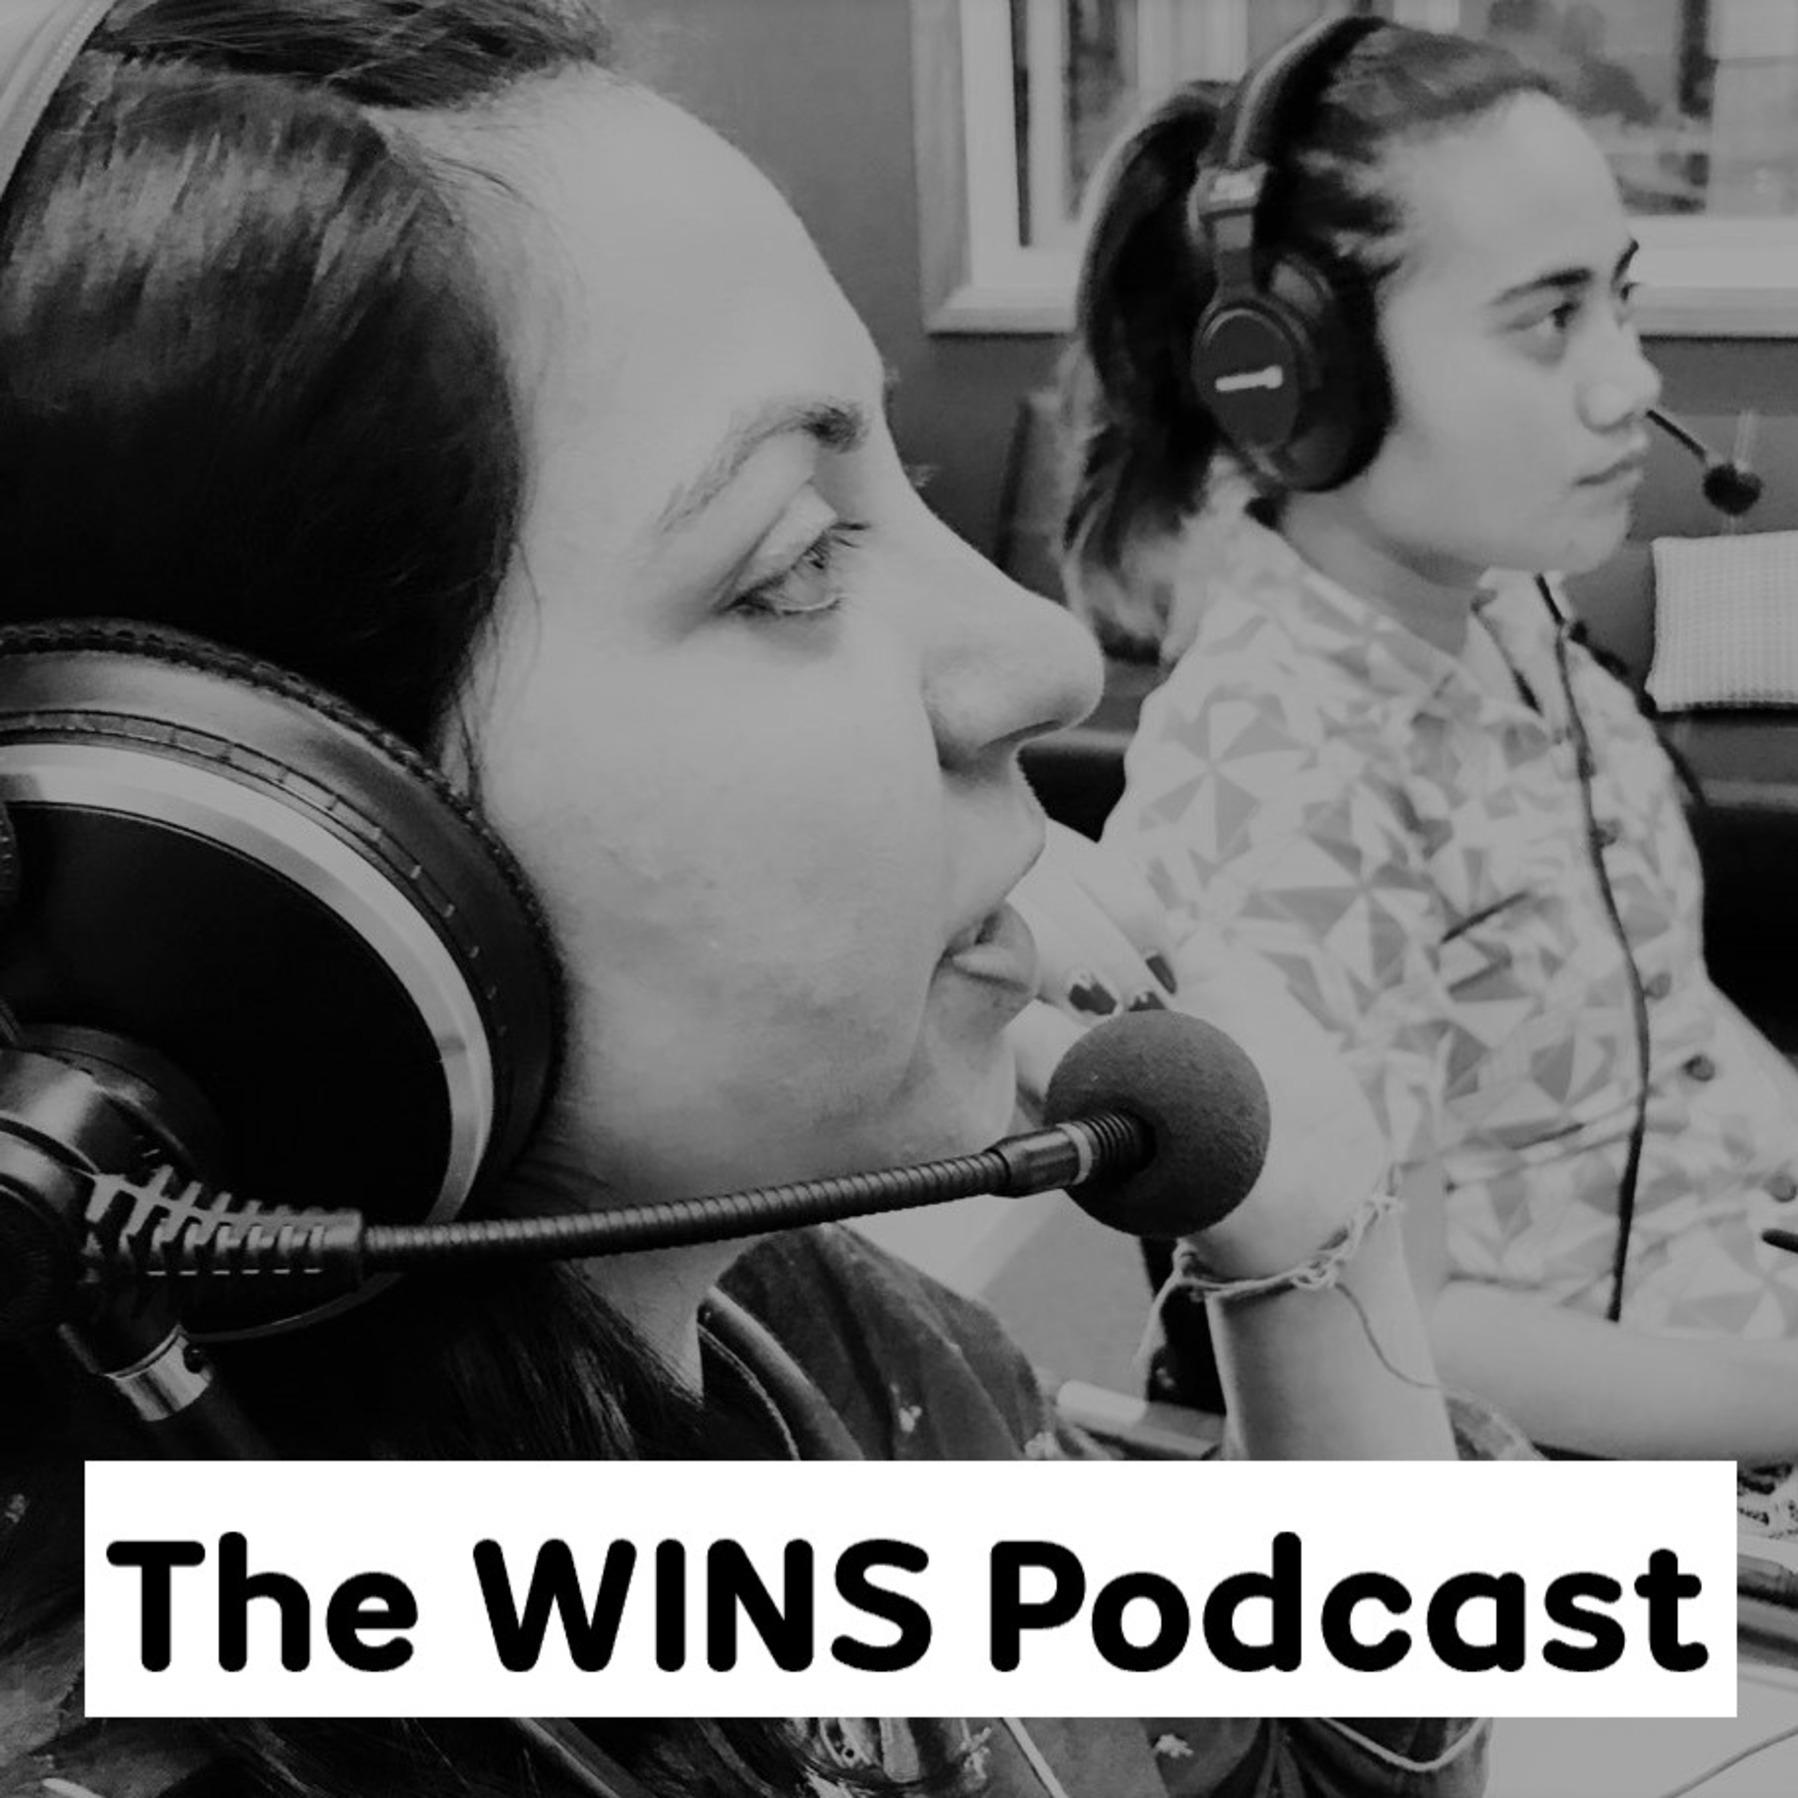 The WINS Podcast